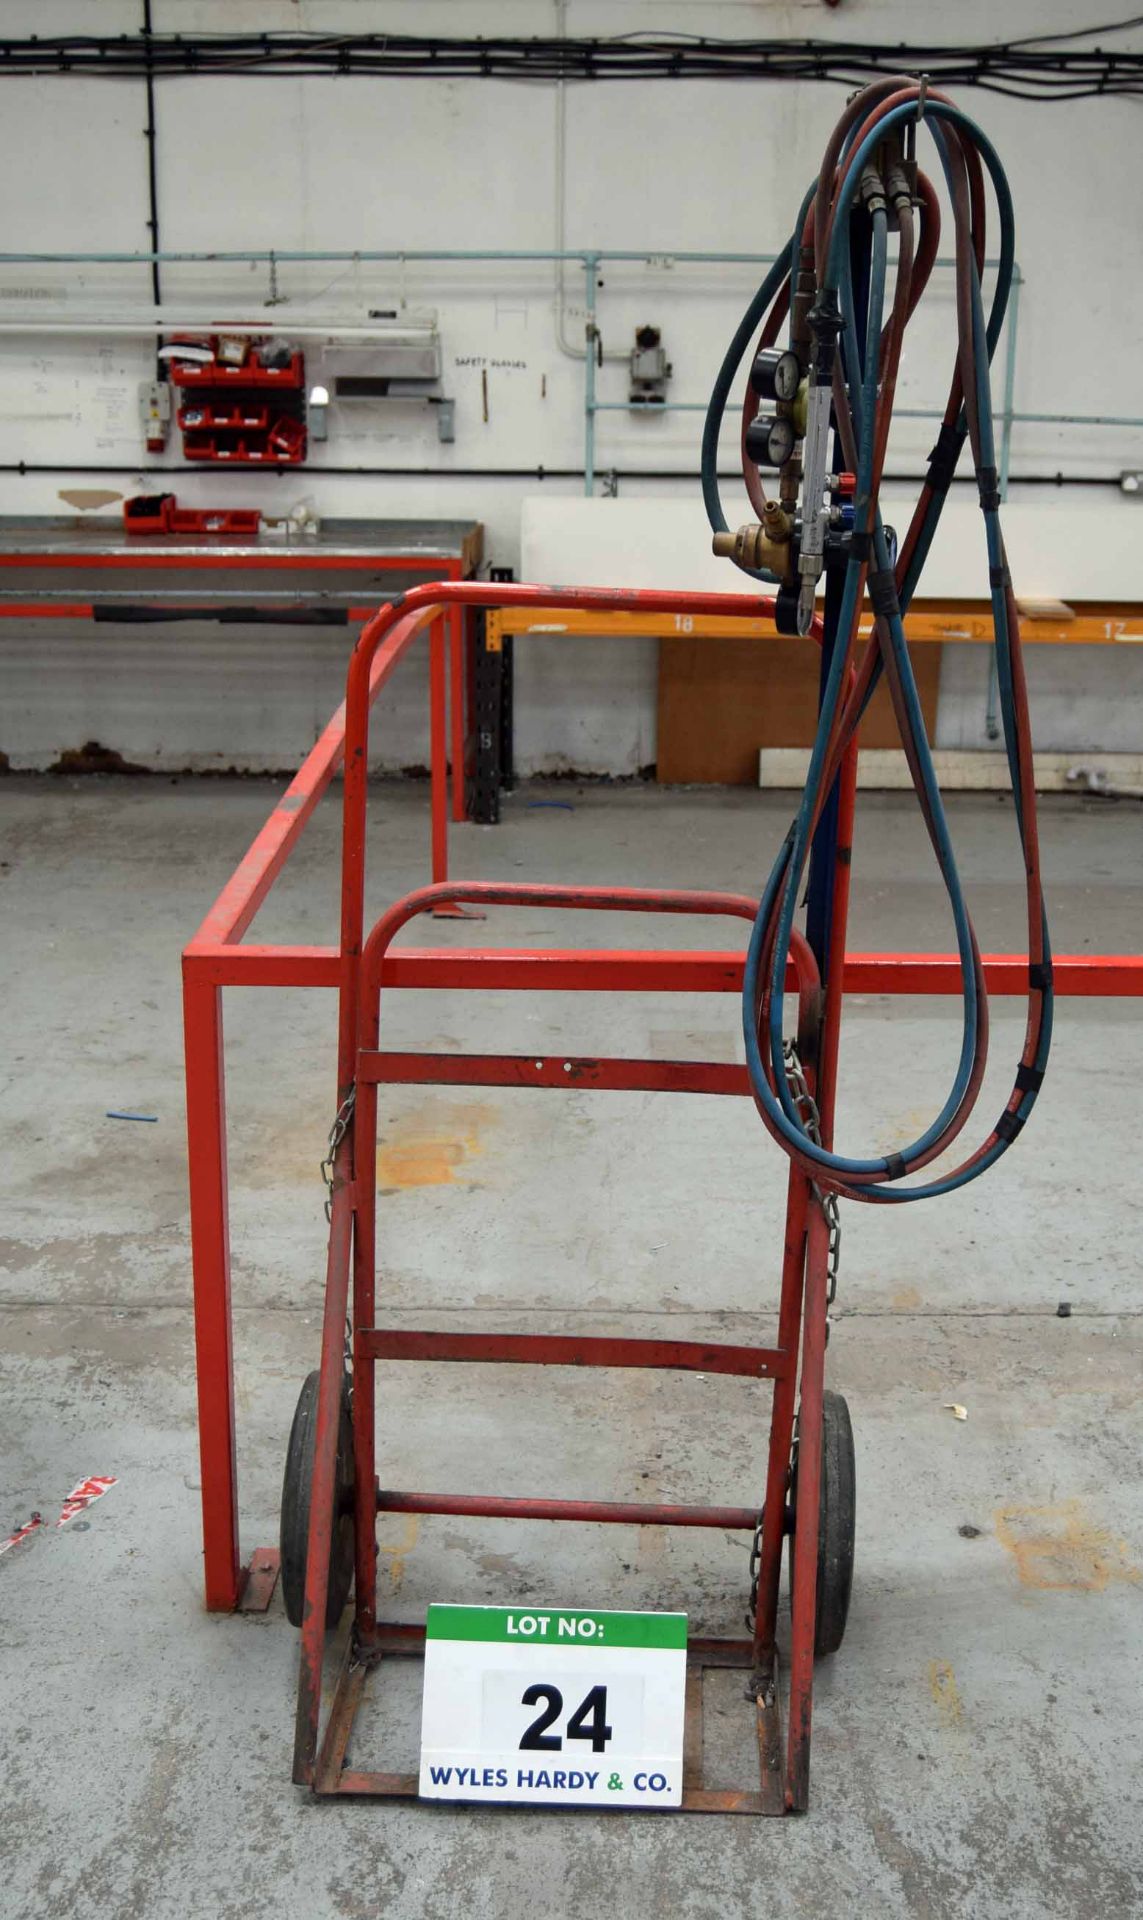 A Twin Bottle Gas Bottle Trolley, Regulators, Hoses and Hand Held Torch (As Photographed)